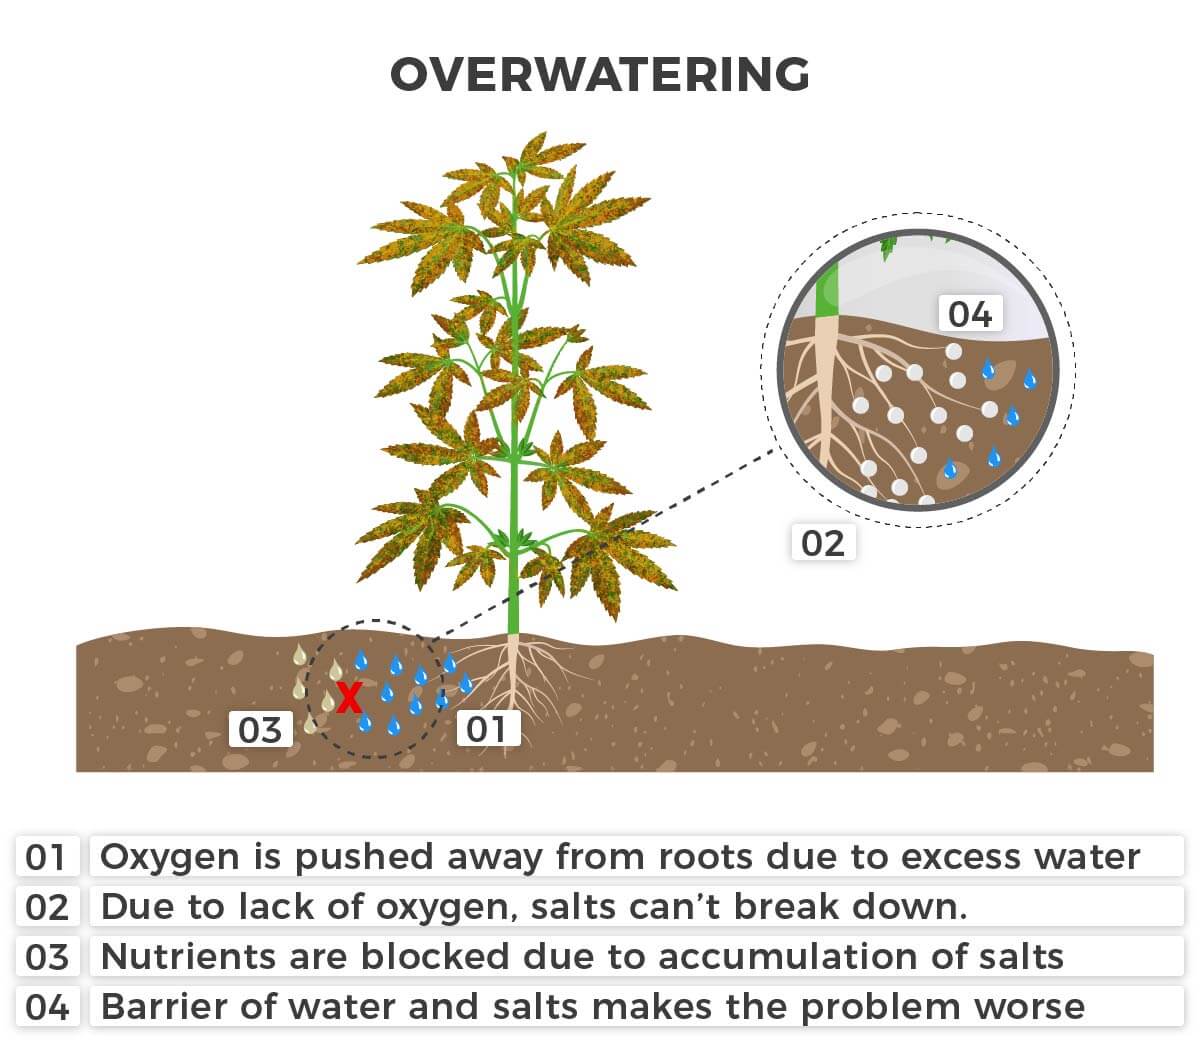 Overwatering causes nutrient lock out